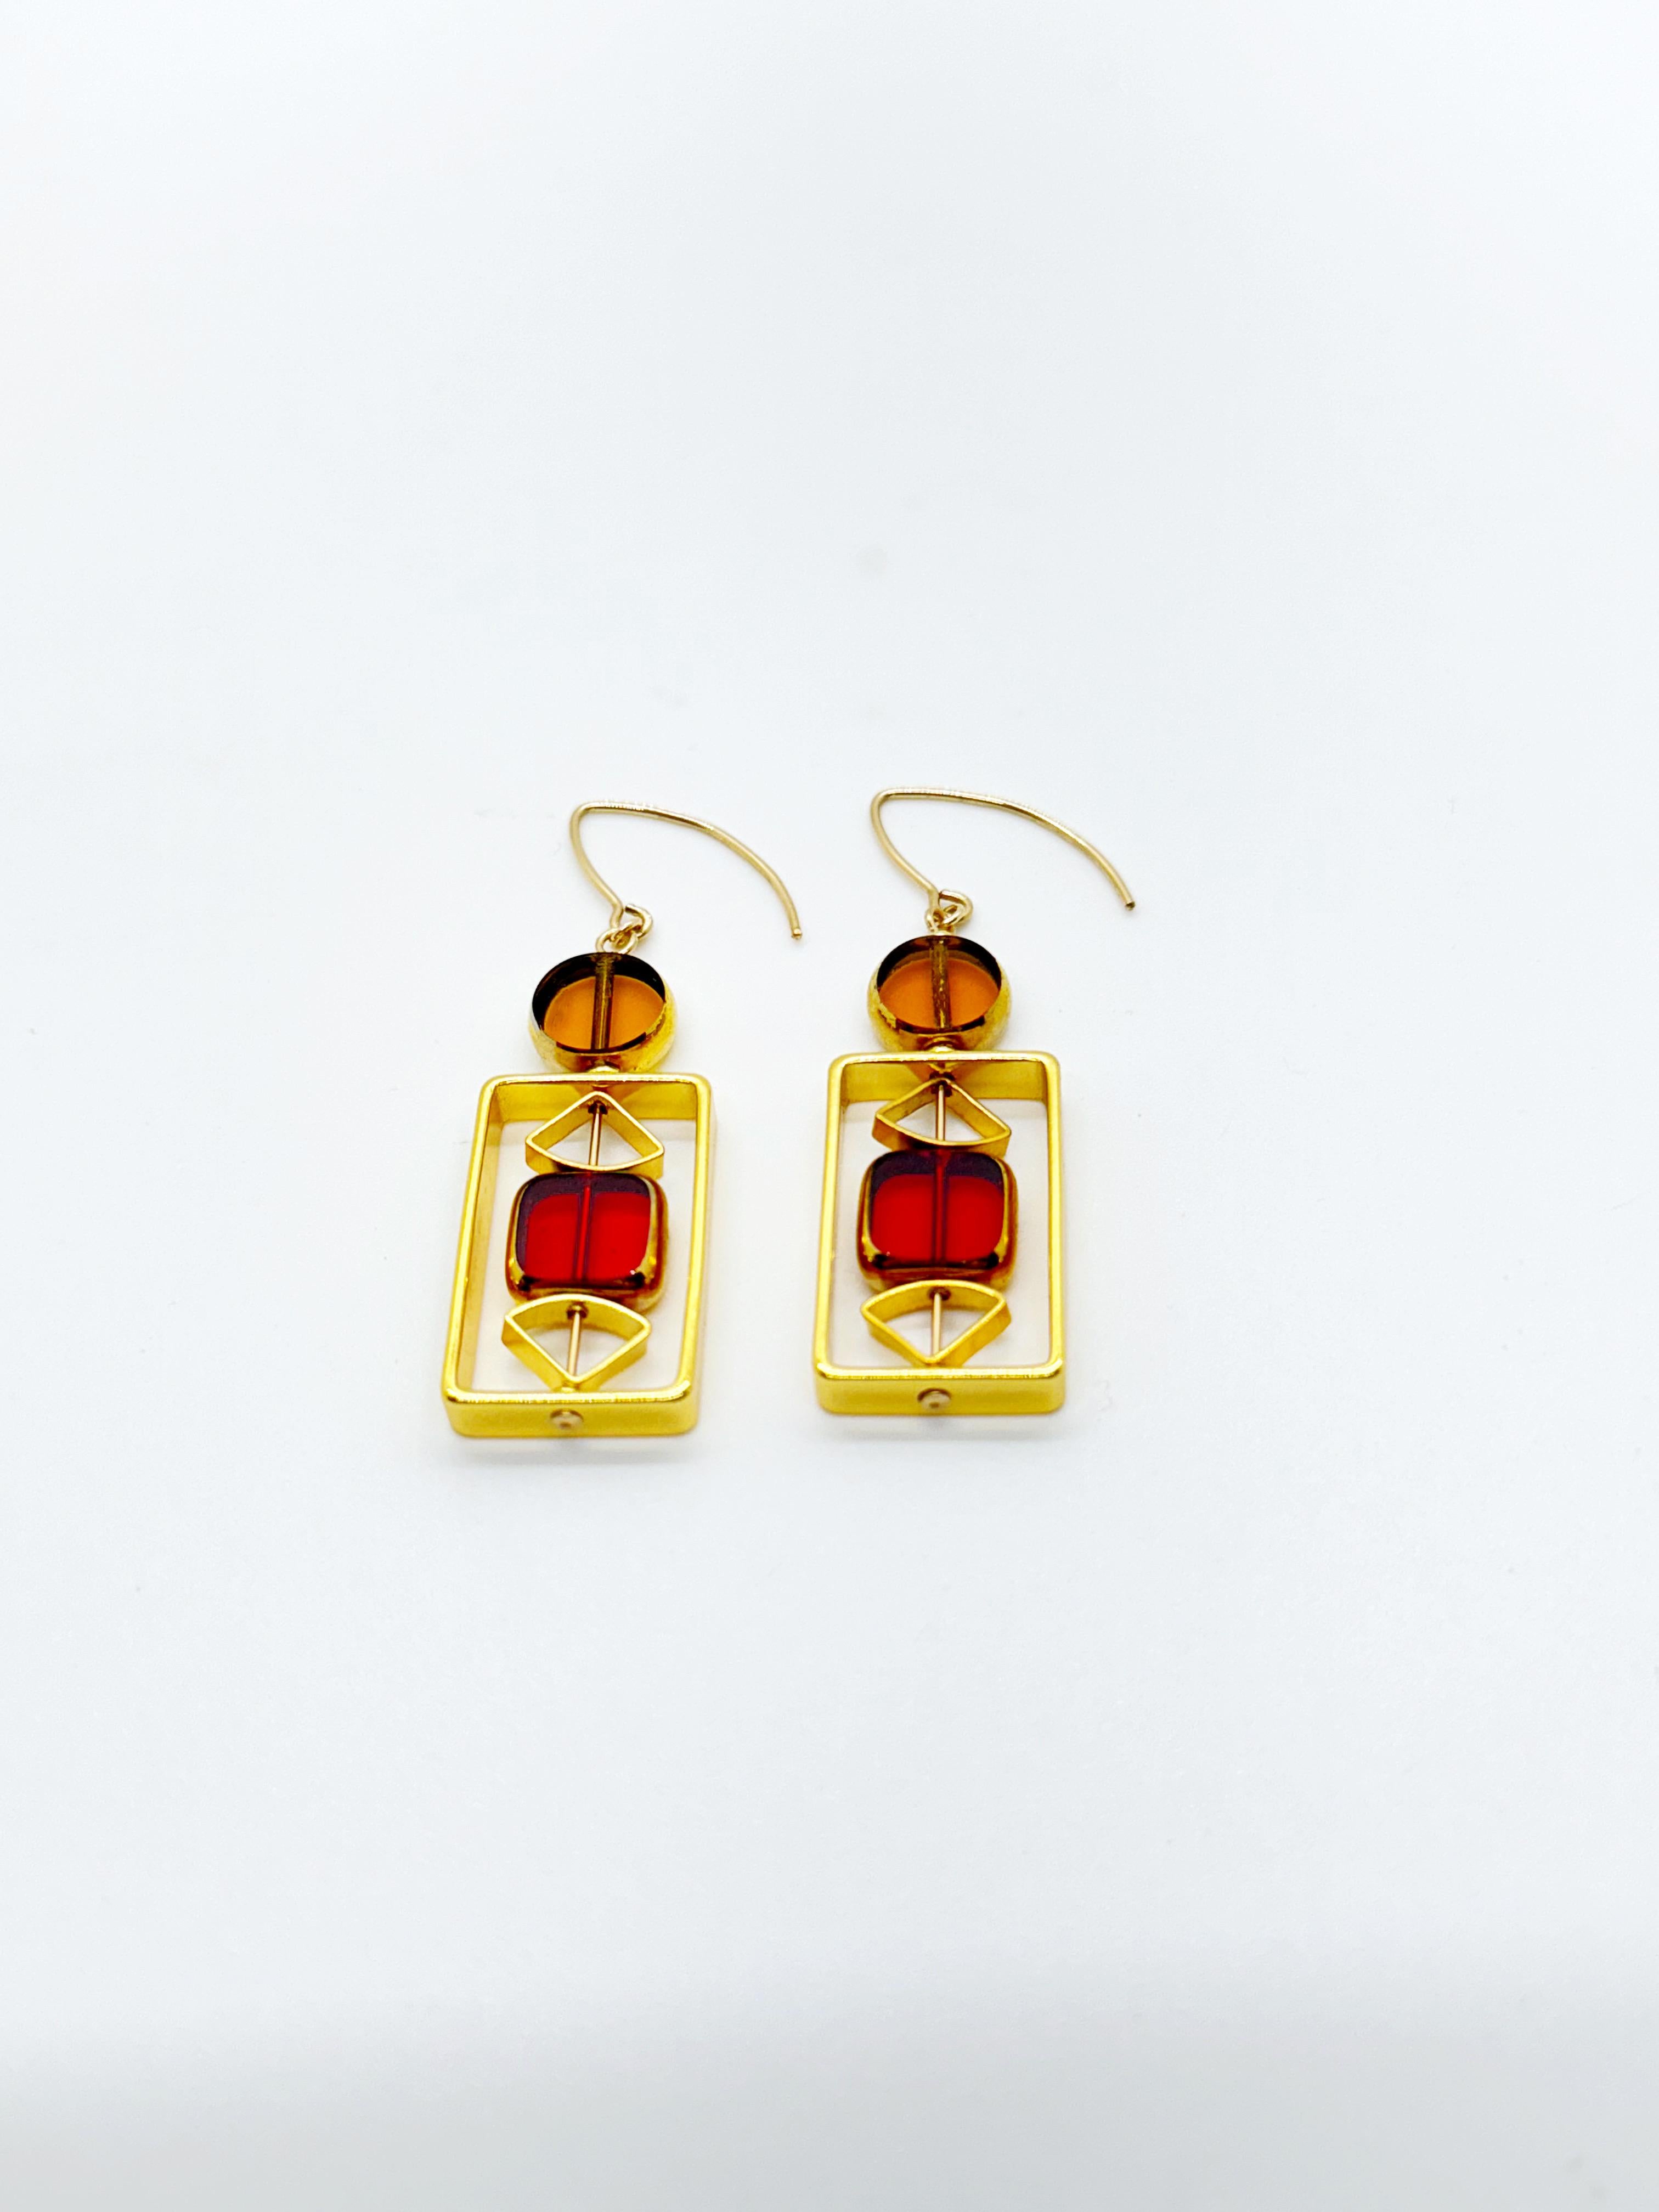 The earrings are lightweight and are made to rotate and reposition with movement.

The earrings are translucent yellow and red new old stock vintage German glass beads framed with 24K gold. The beads were hand-pressed during the 1920s-1960s in